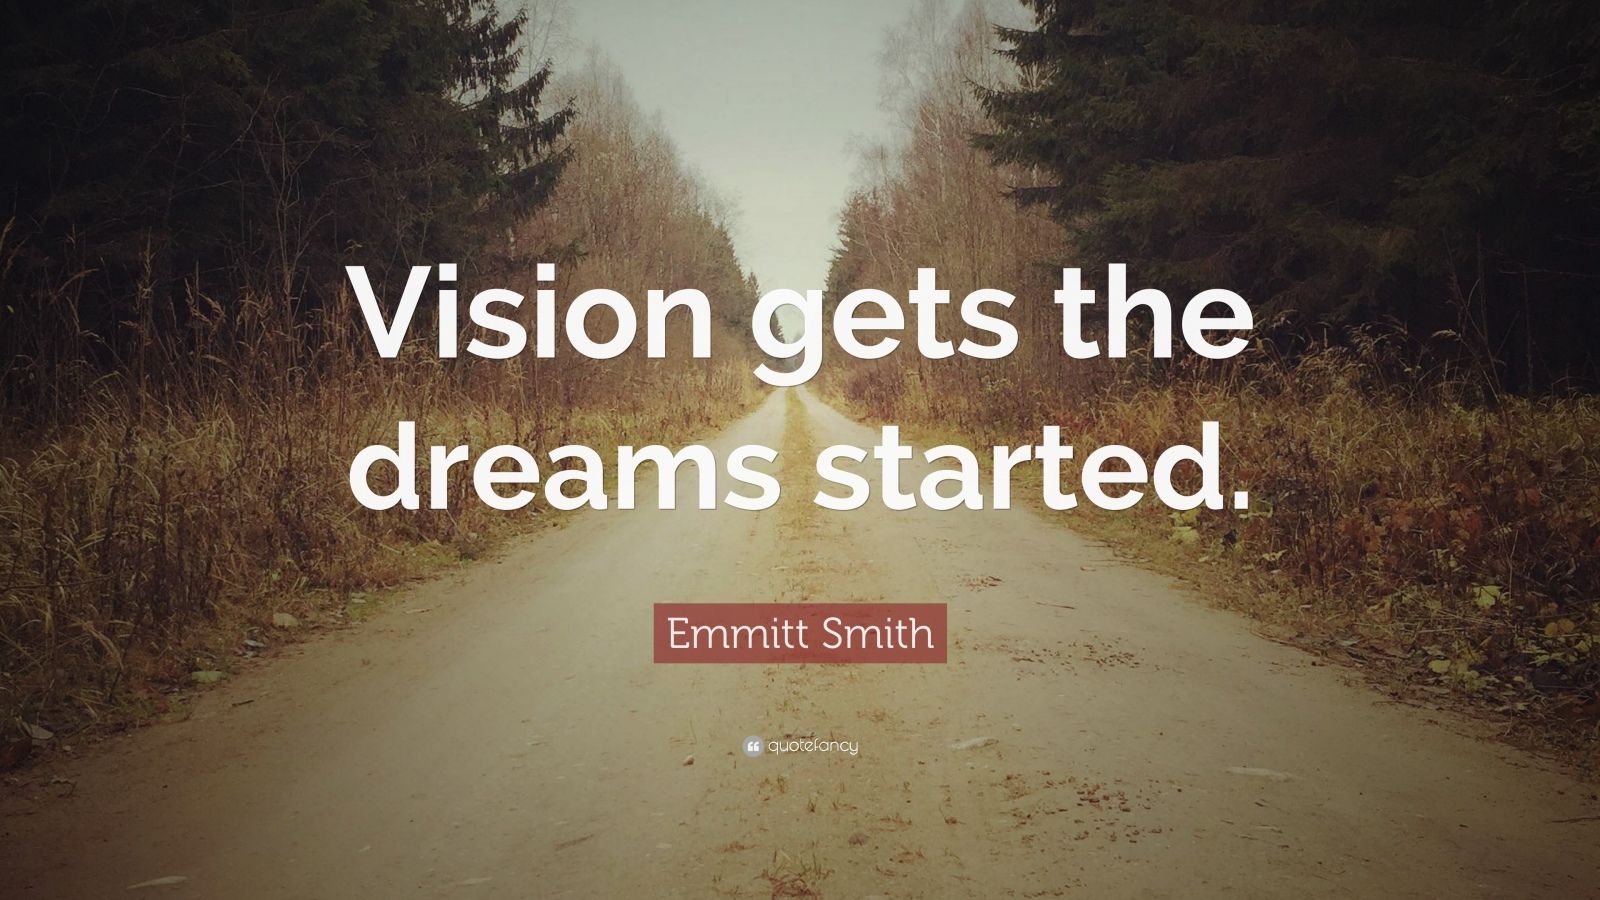 Emmitt Smith Quote “Vision gets the dreams started.” (7